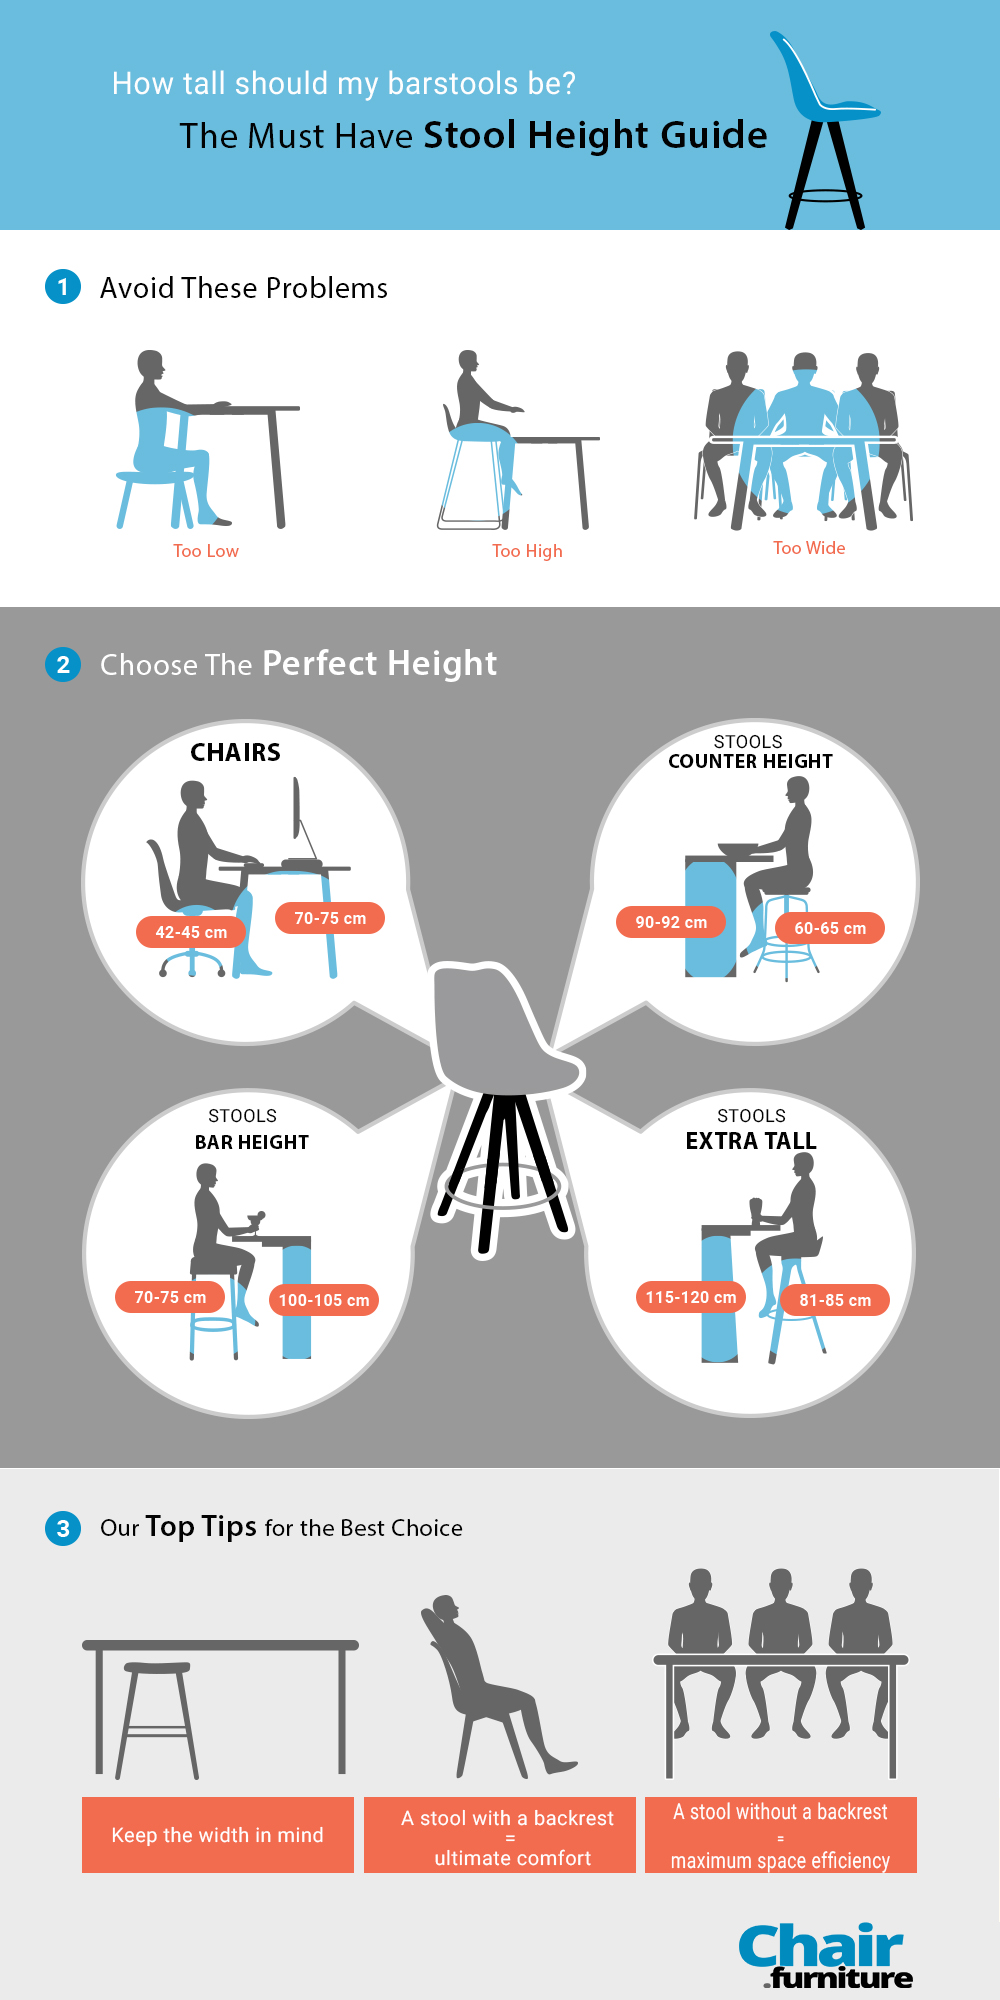 The Perfect Stool Height Guide, Typical Bar Stool Height